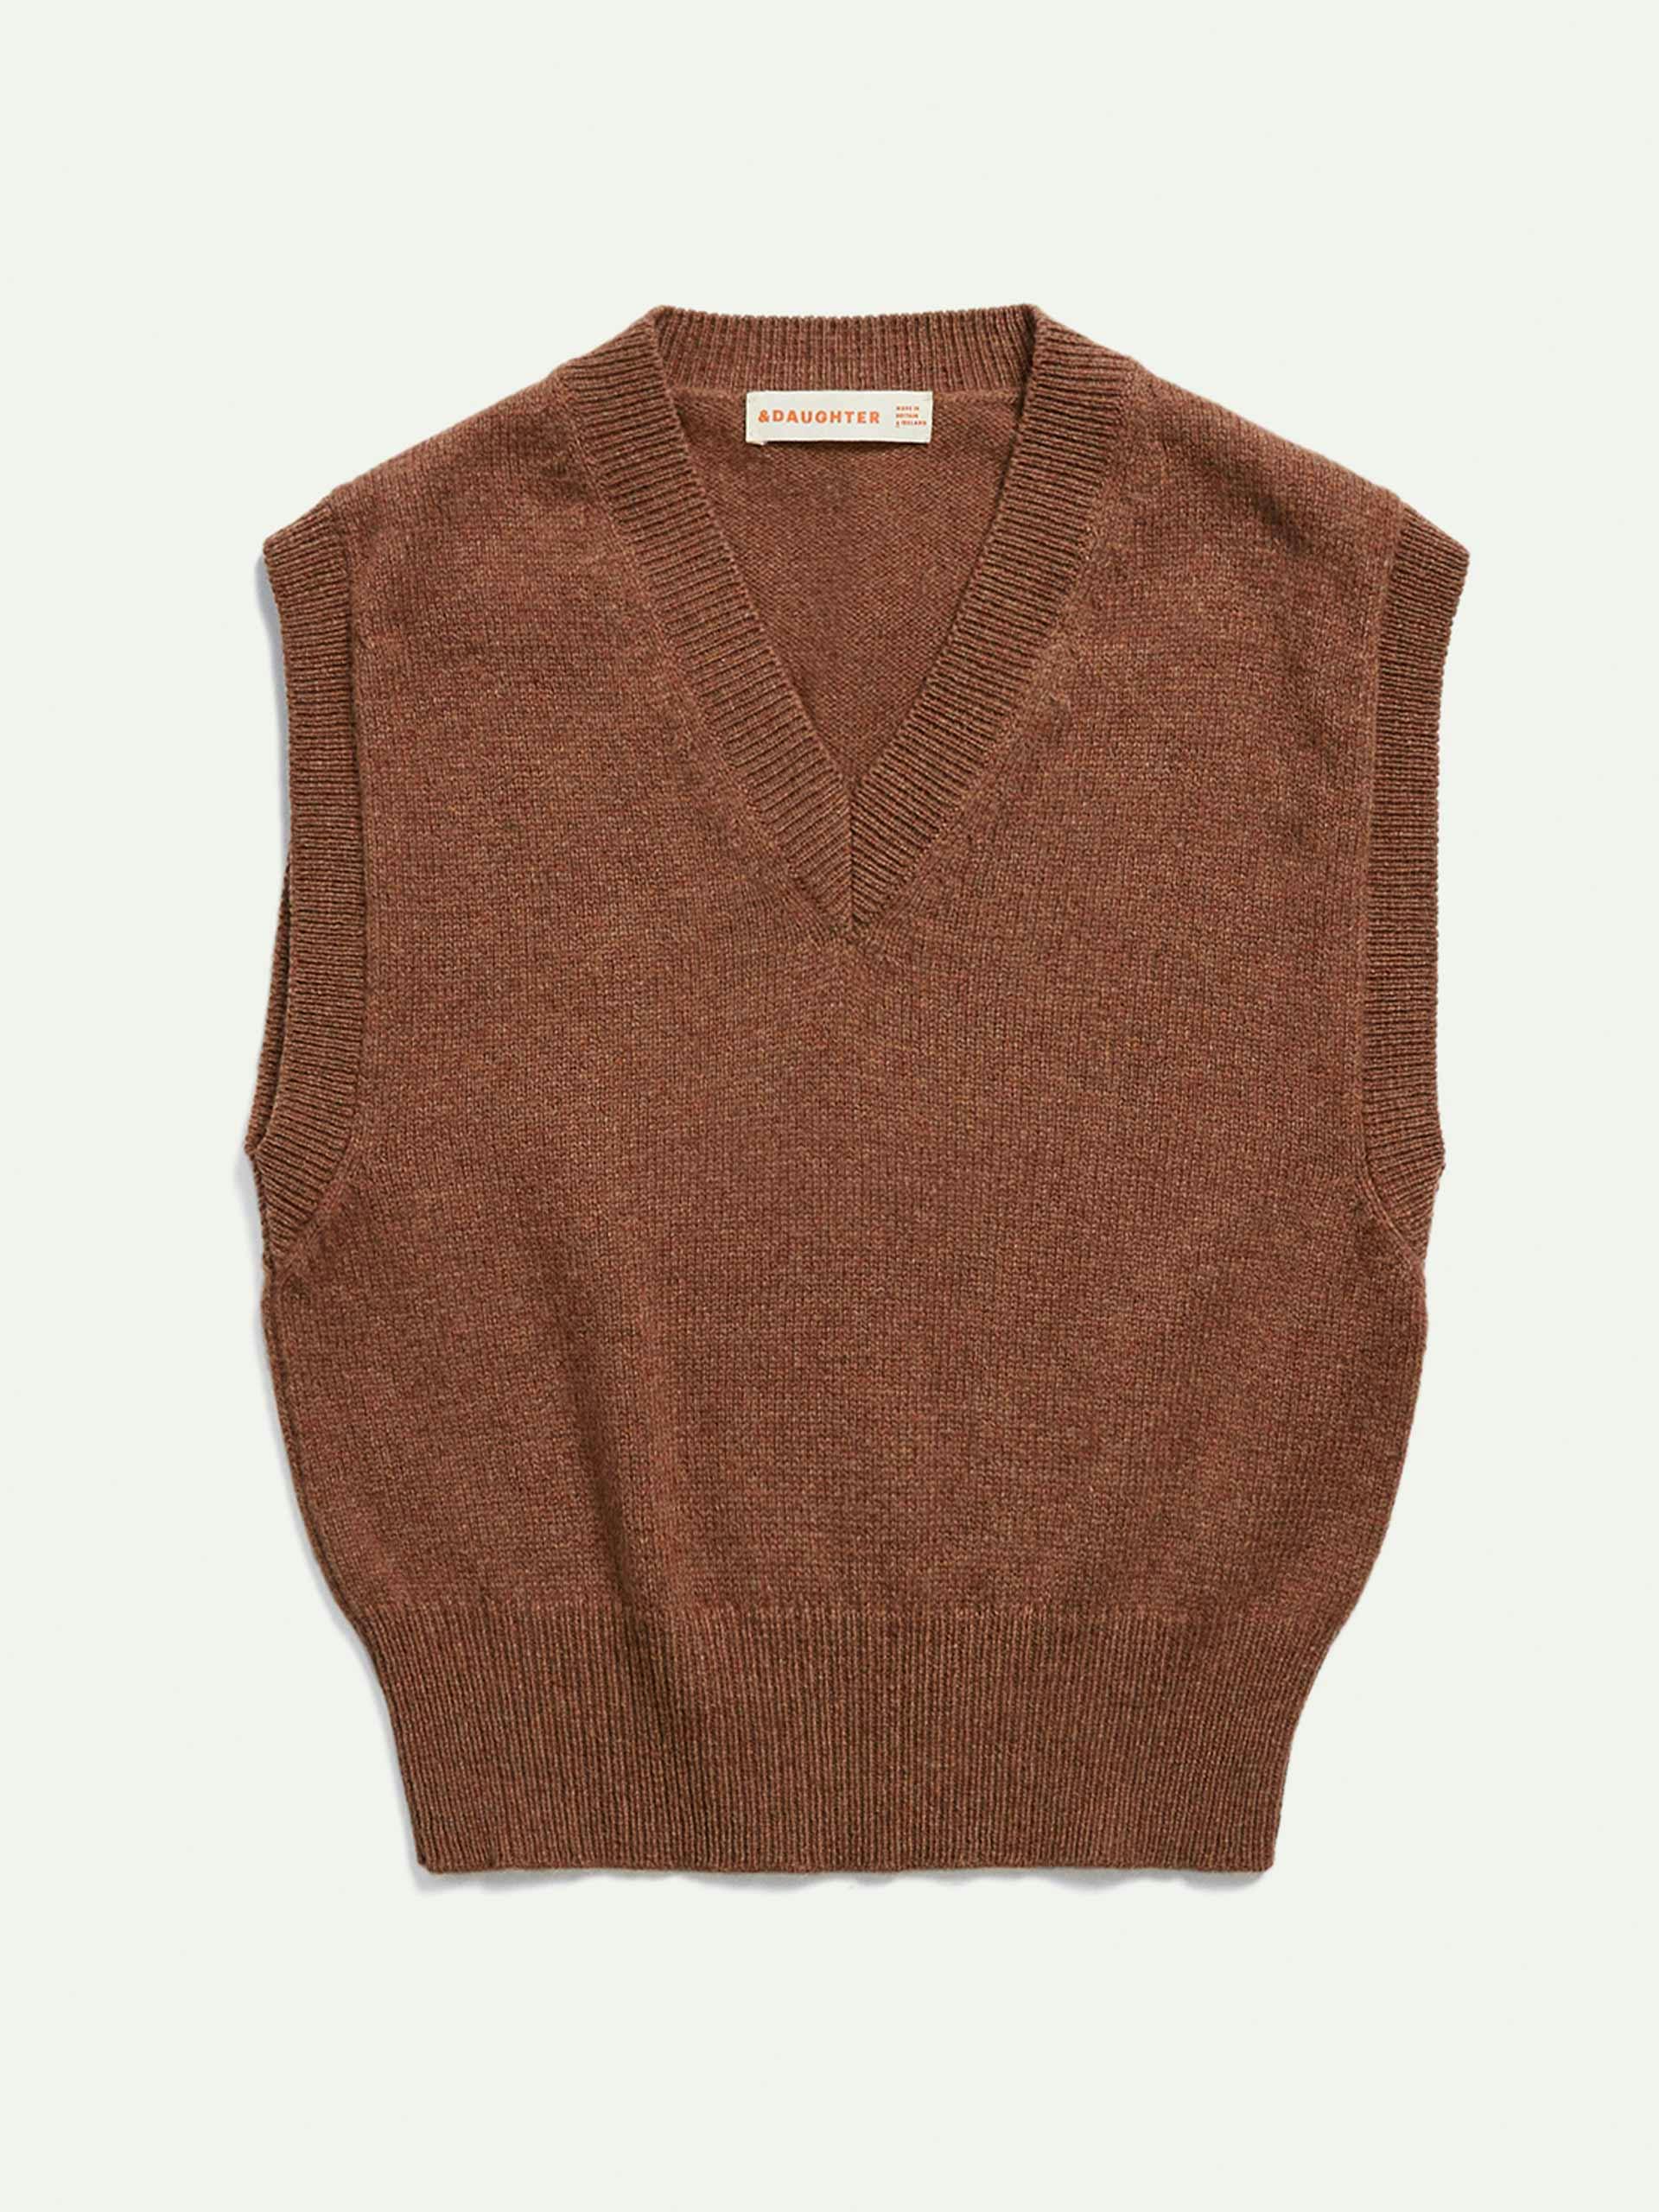 Brown Athea Geelong knitted tank